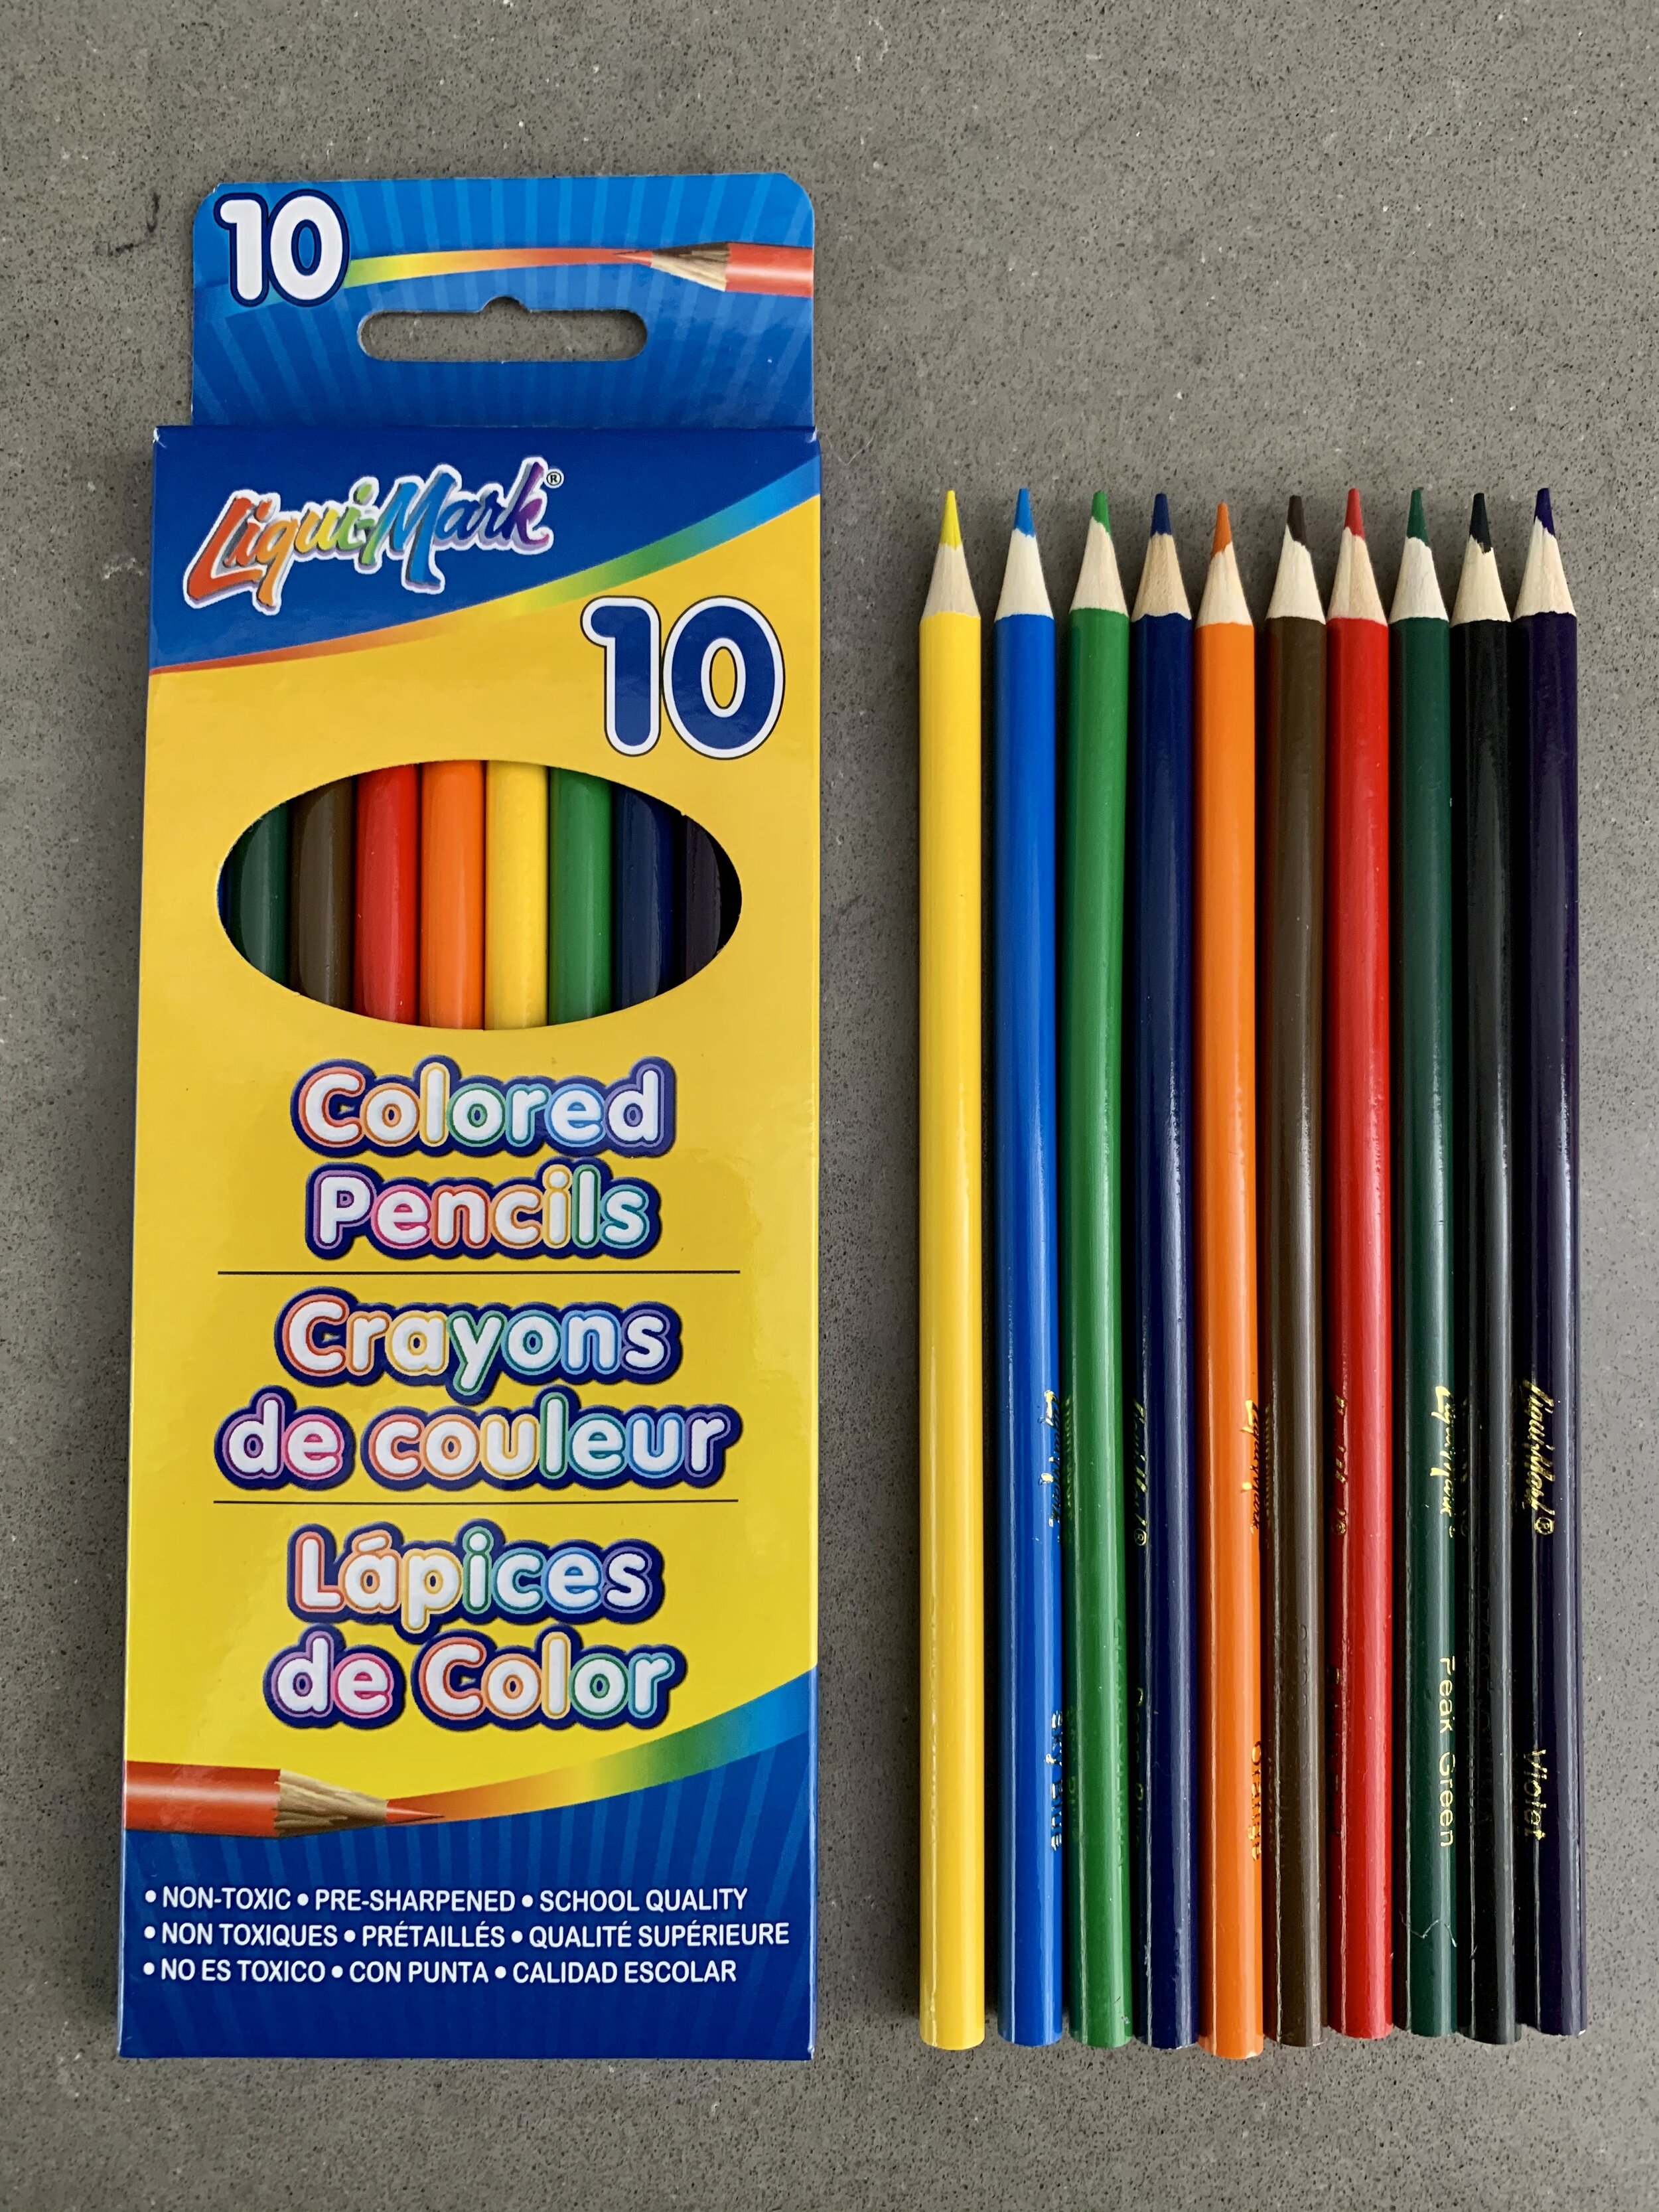 Multicultural Colored Pencils - Set of 8 — COLORING OVER CANCER